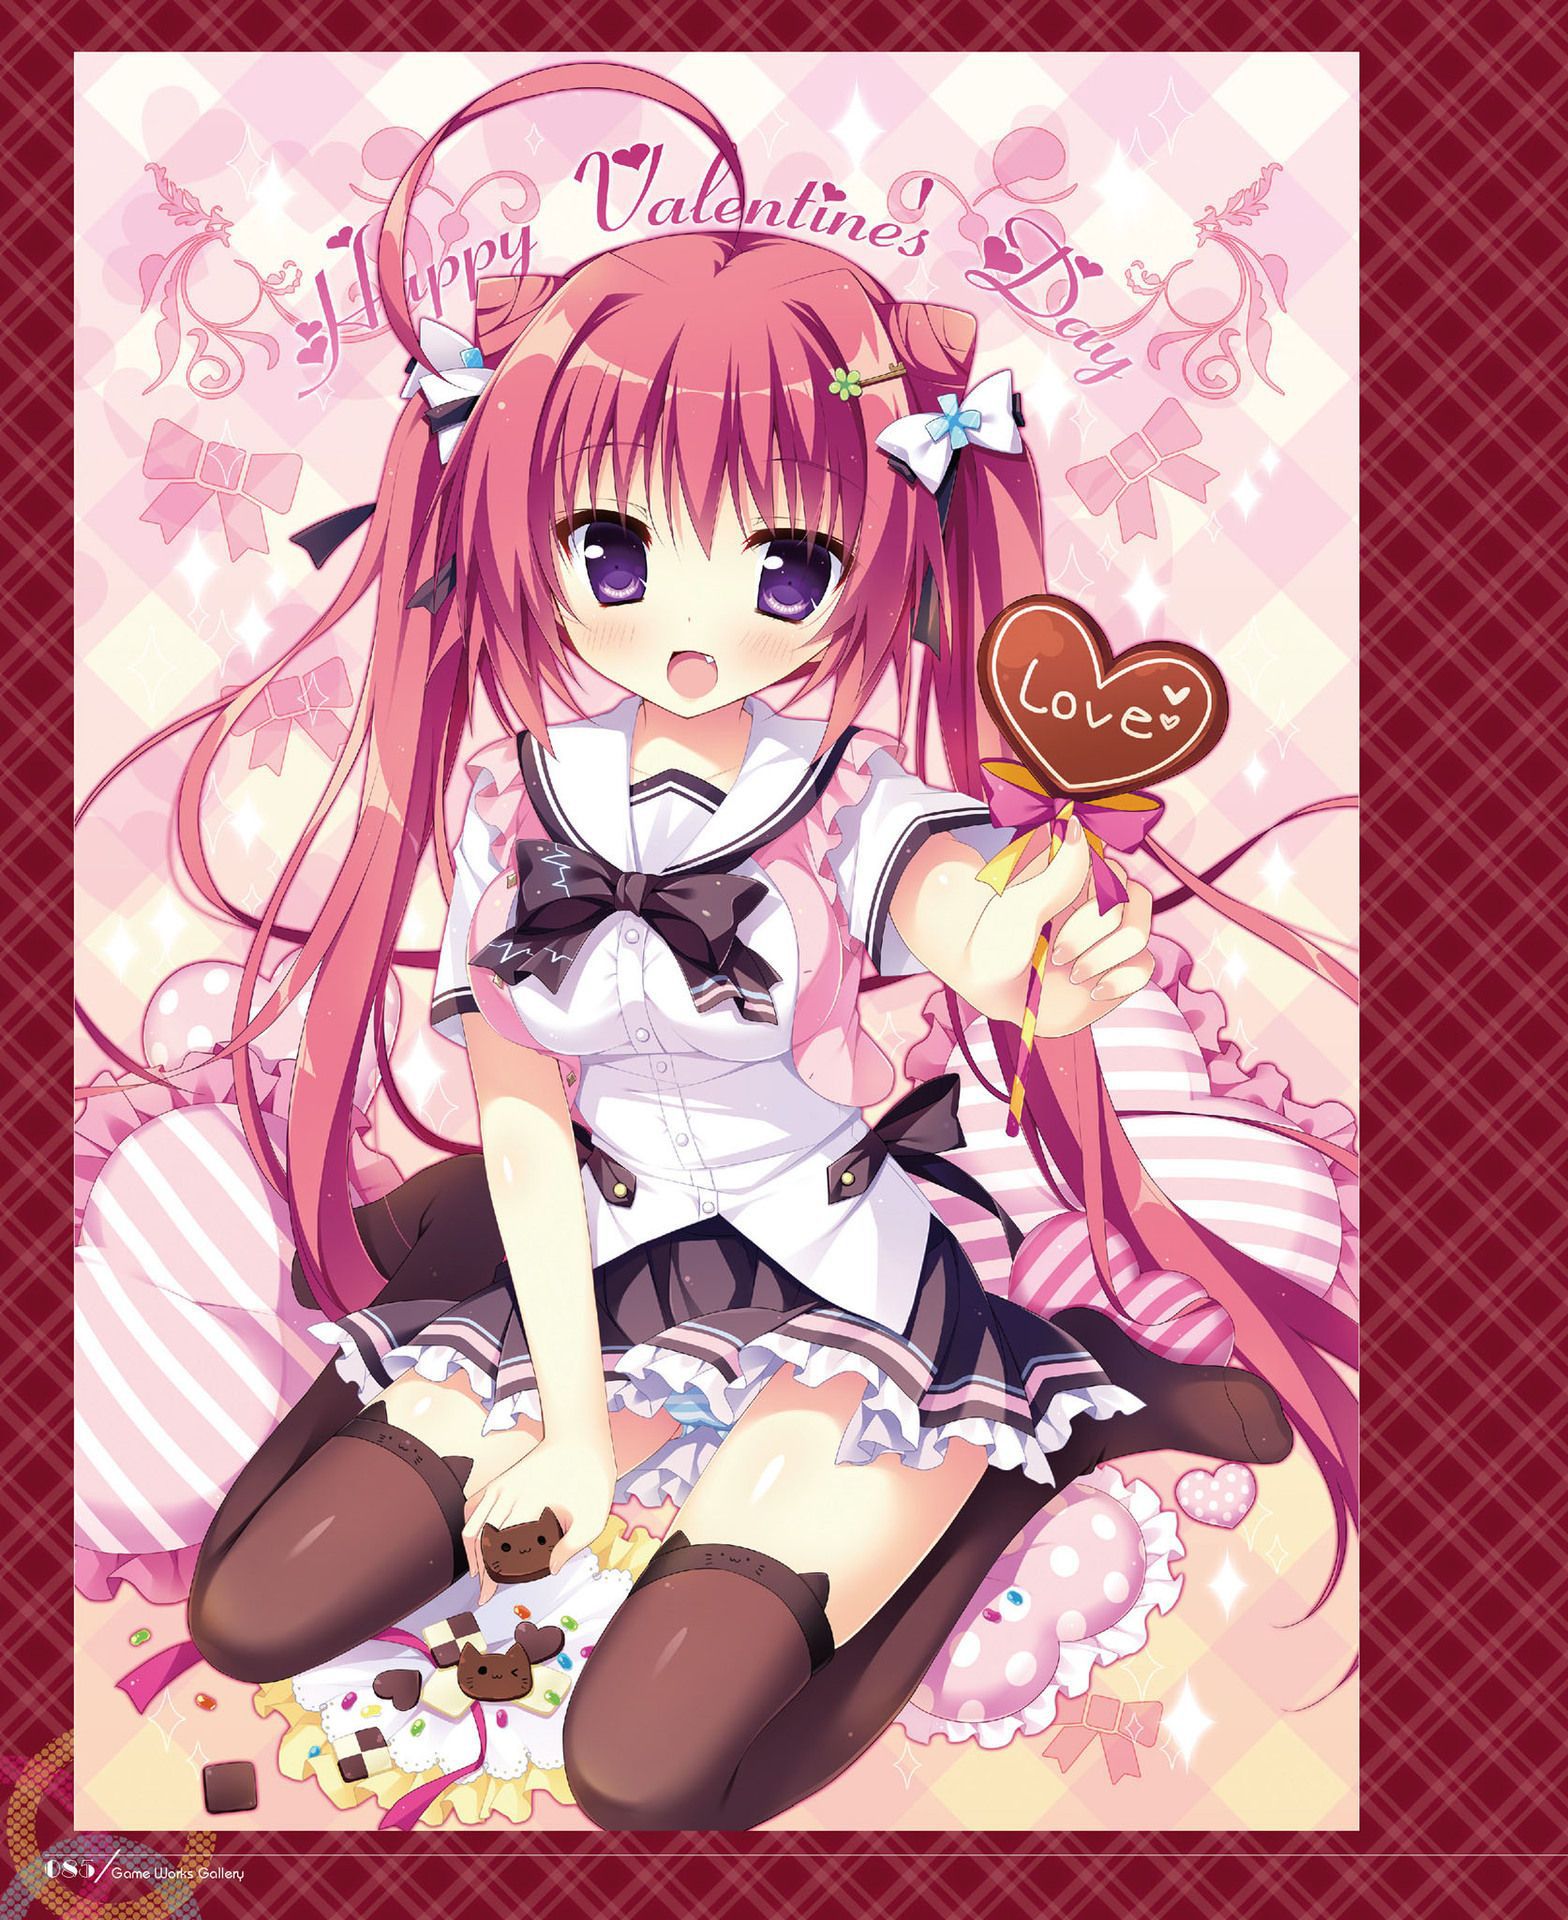 [Secondary ZIP] rainbow image of cute striped bread girl 8